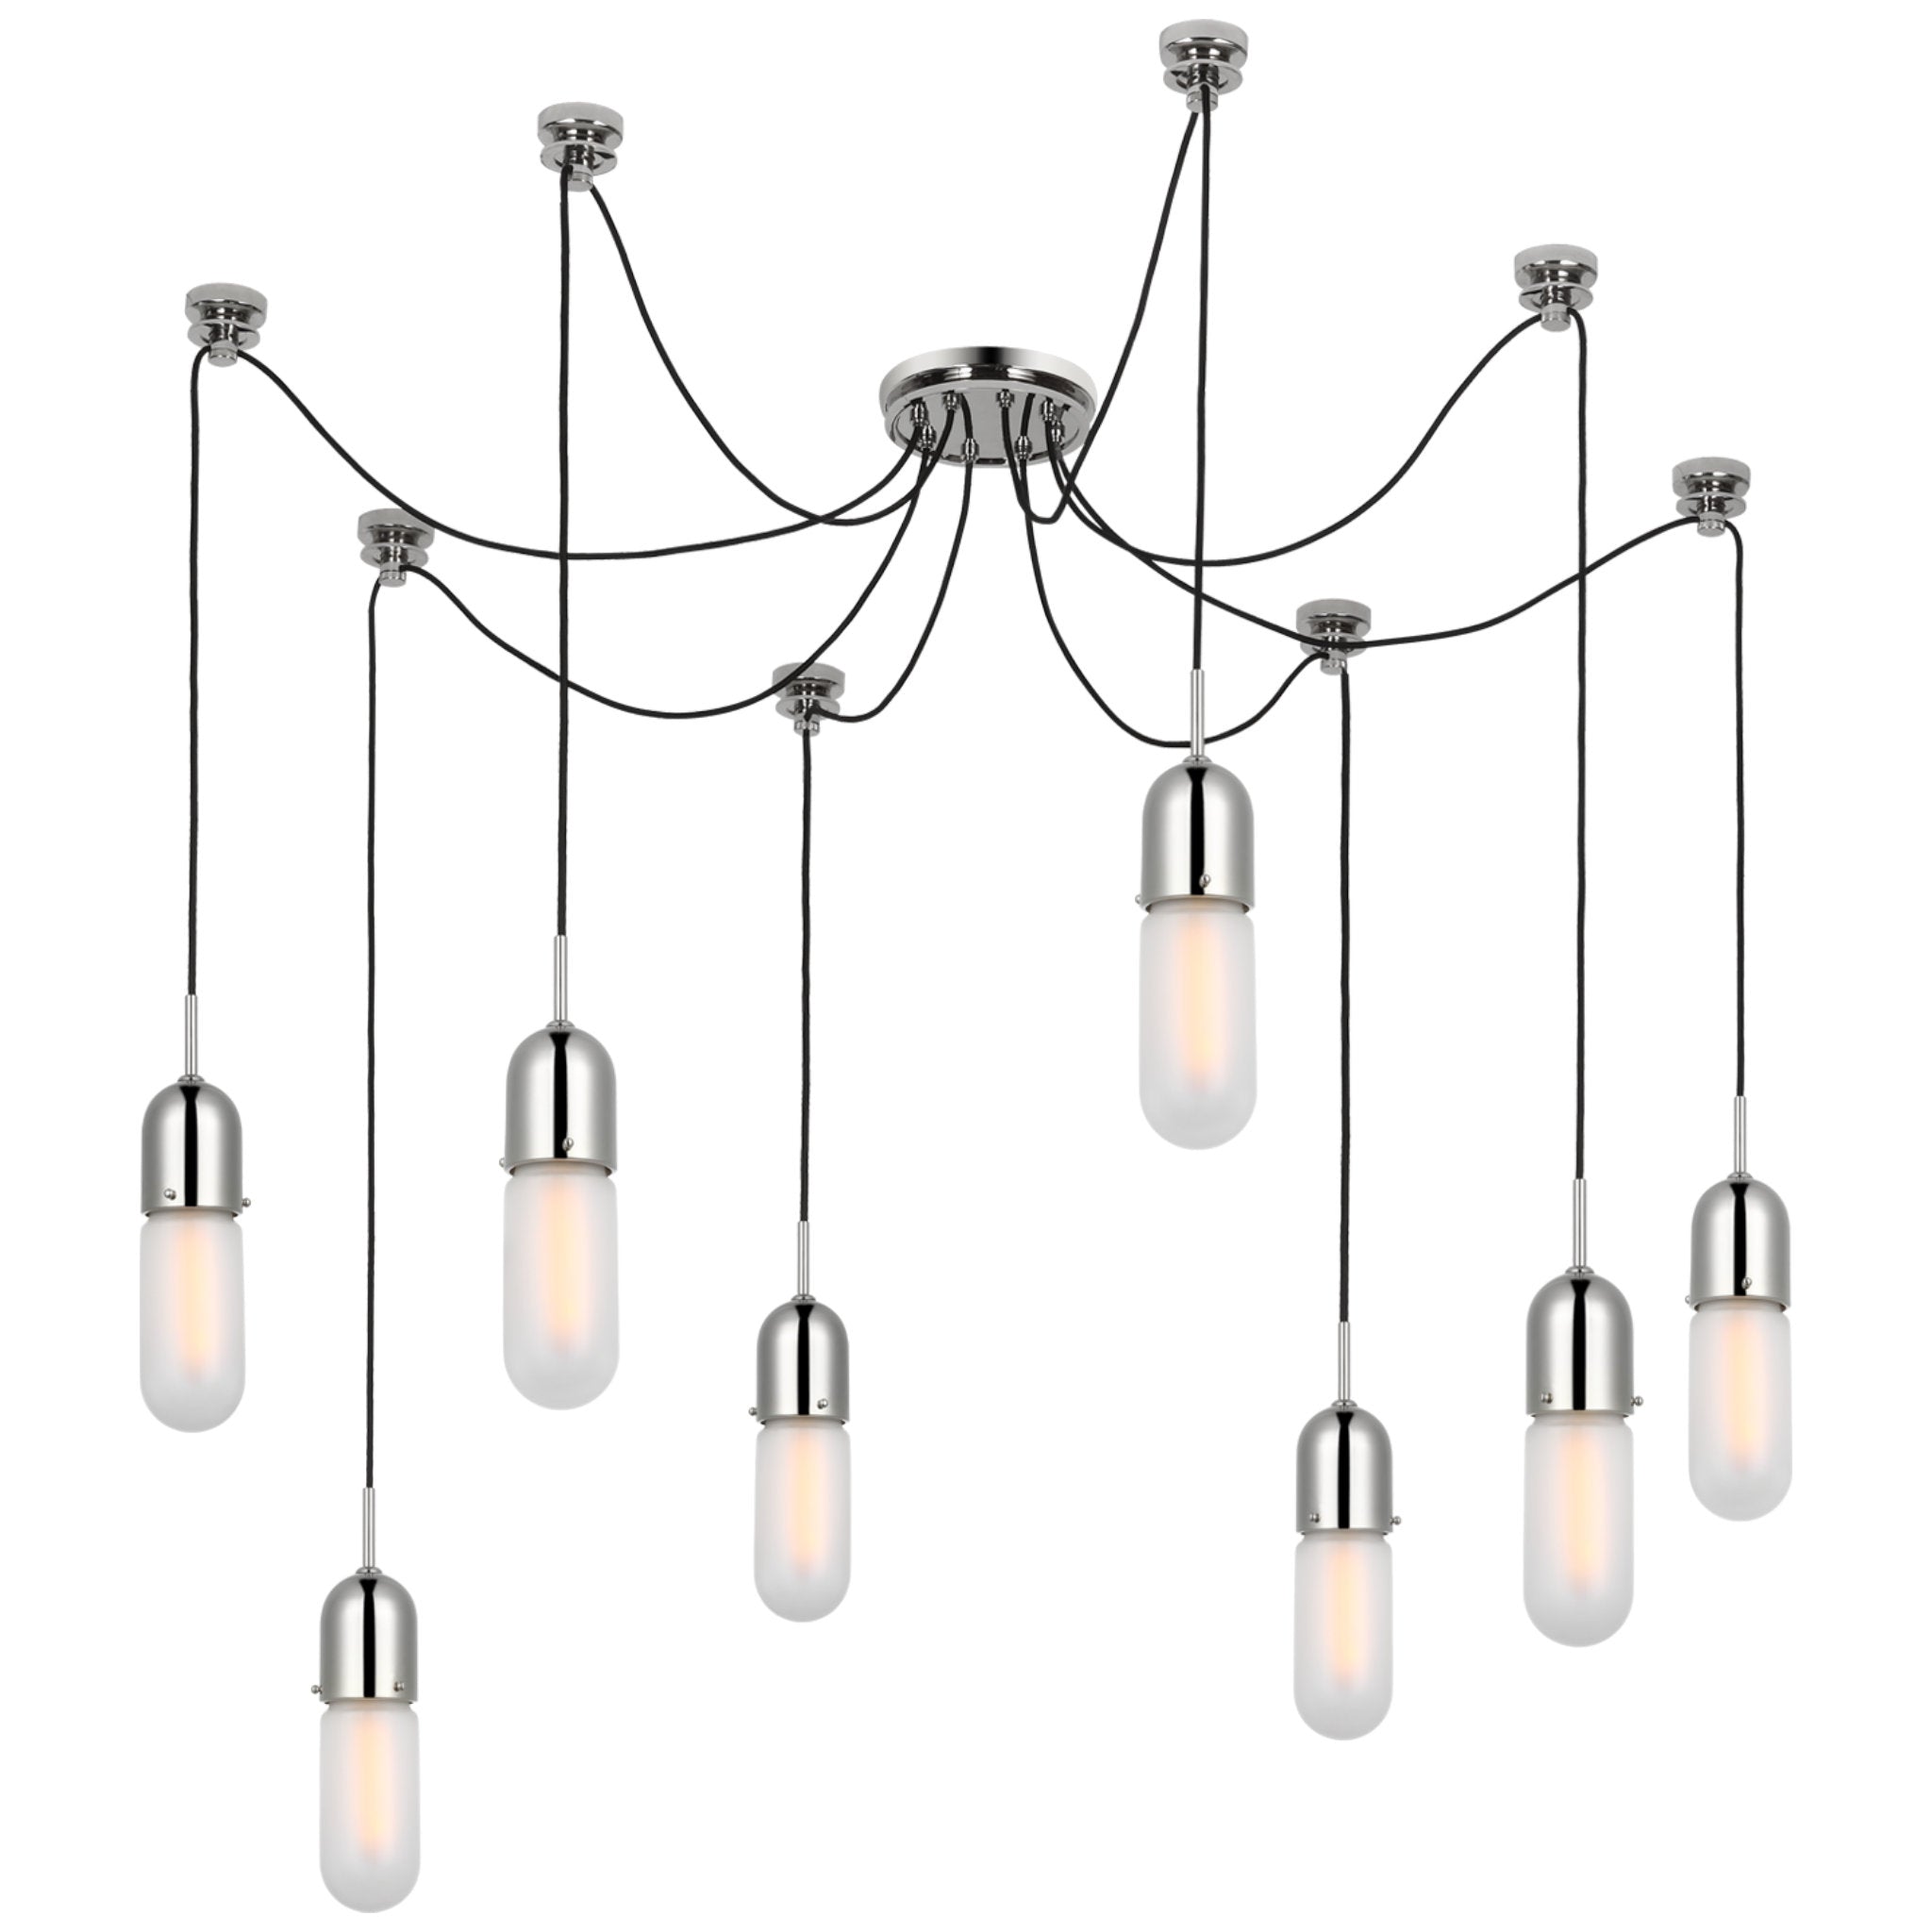 Thomas O'Brien Junio 8-Light Chandelier in Polished Nickel with Frosted Glass